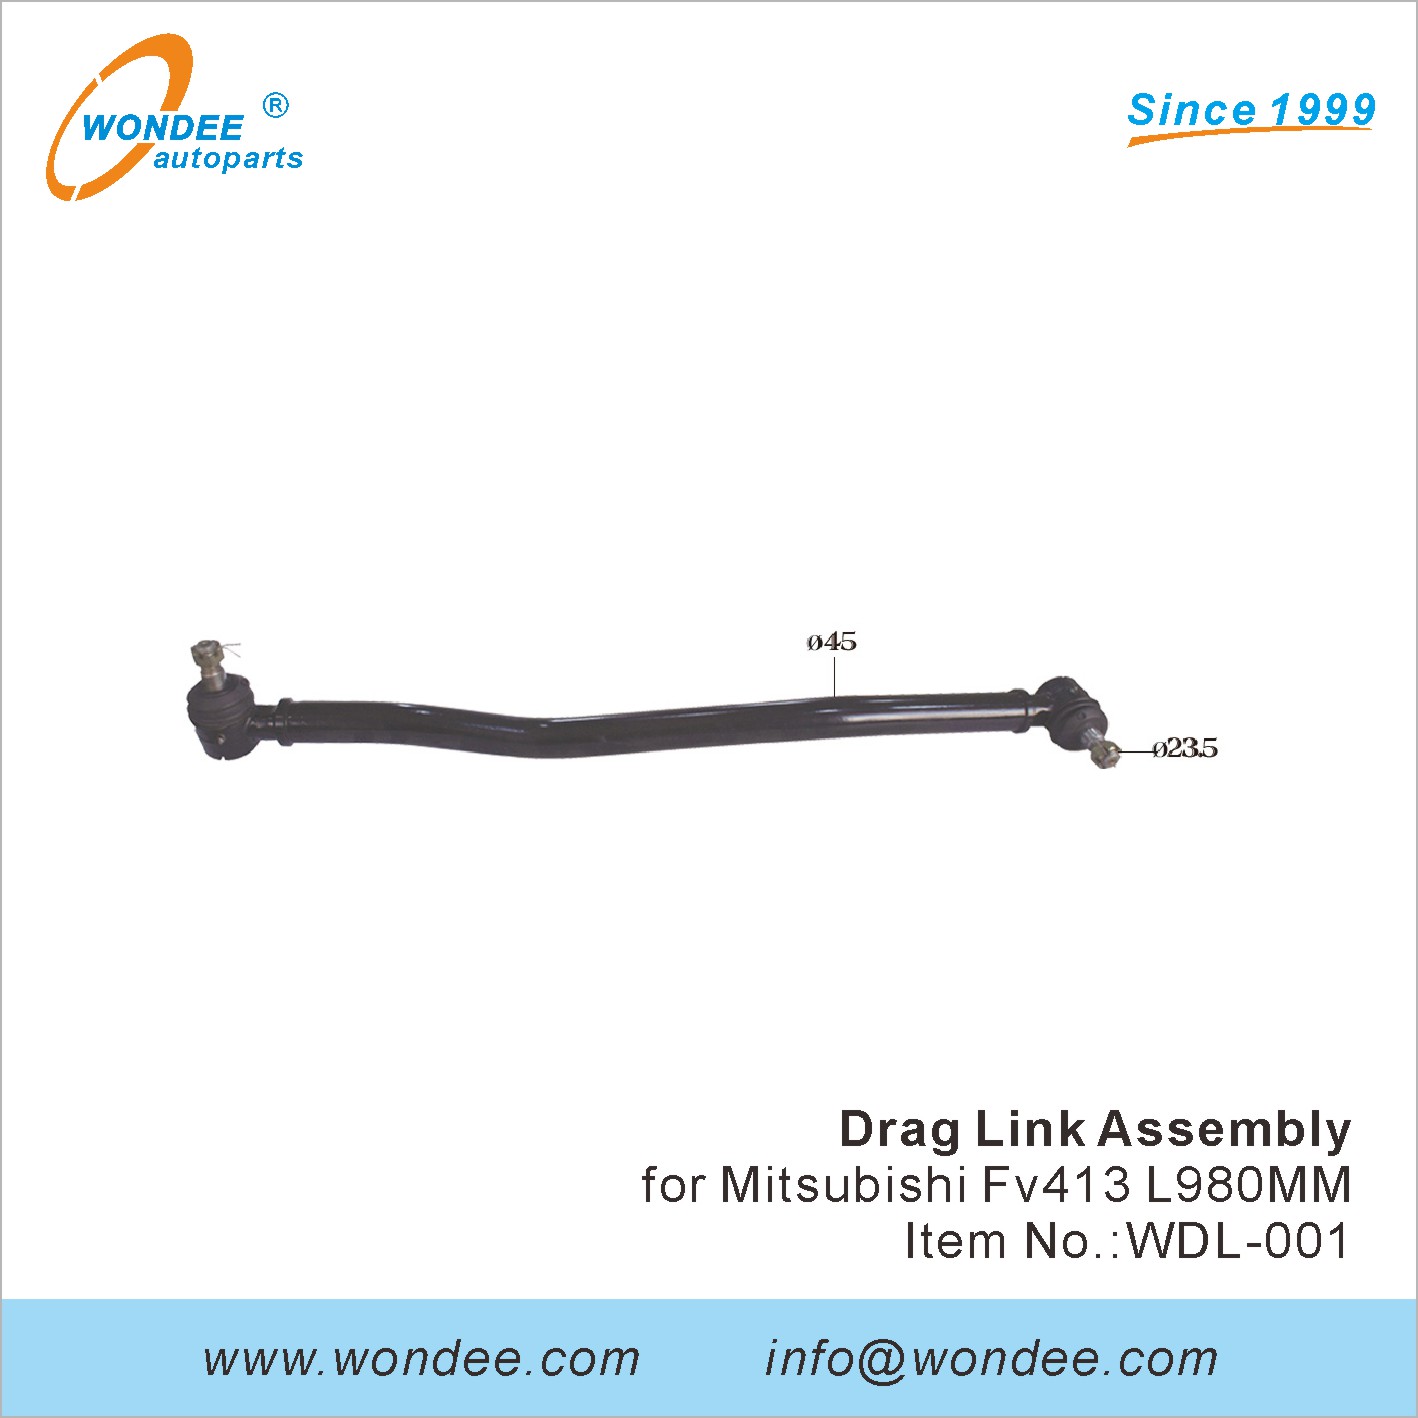 Tie Rods assembly and Drag Links assembly for Trucks